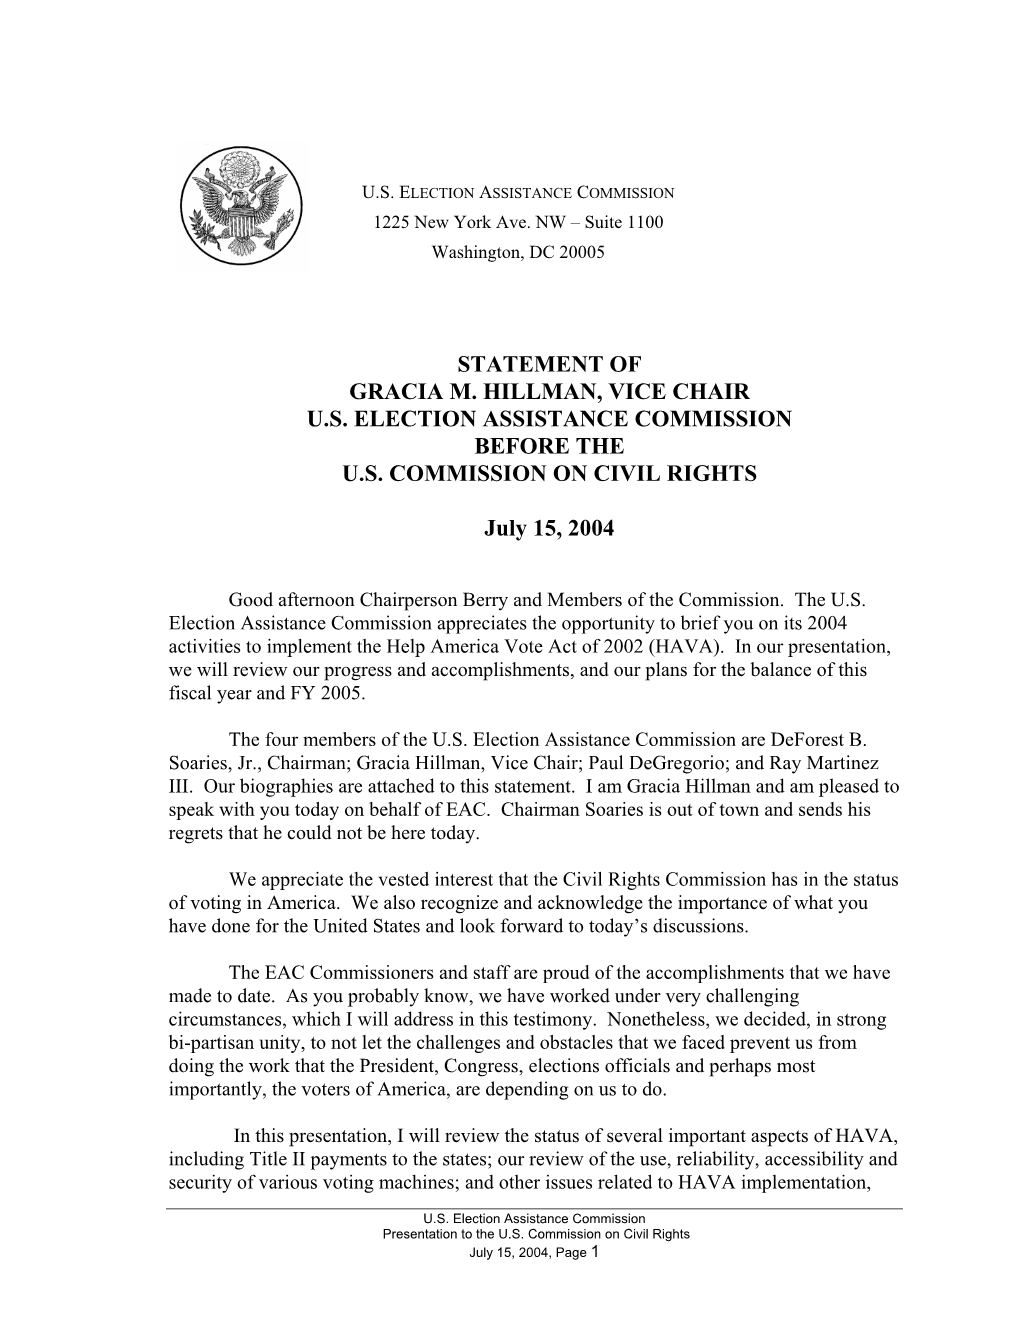 Statement of Gracia M. Hillman, Vice Chair U.S. Election Assistance Commission Before the U.S